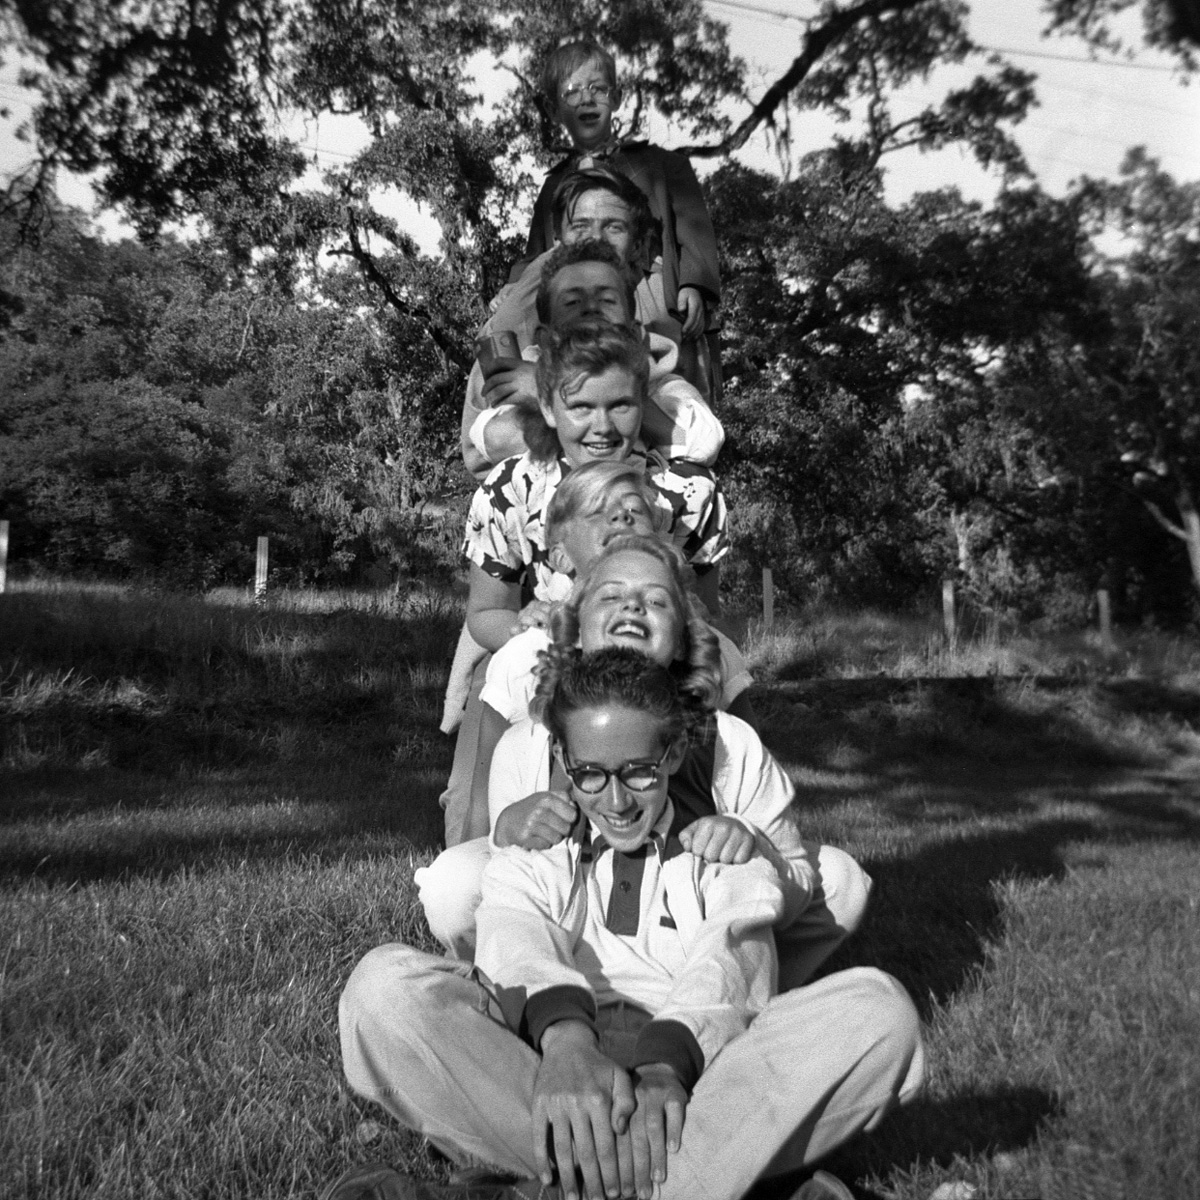 Characteristic mid-century picnic behavior, posing for the human totem pole photo. In this case, 1953, me at the top, my brother at the bottom, various friends in between. View full size.